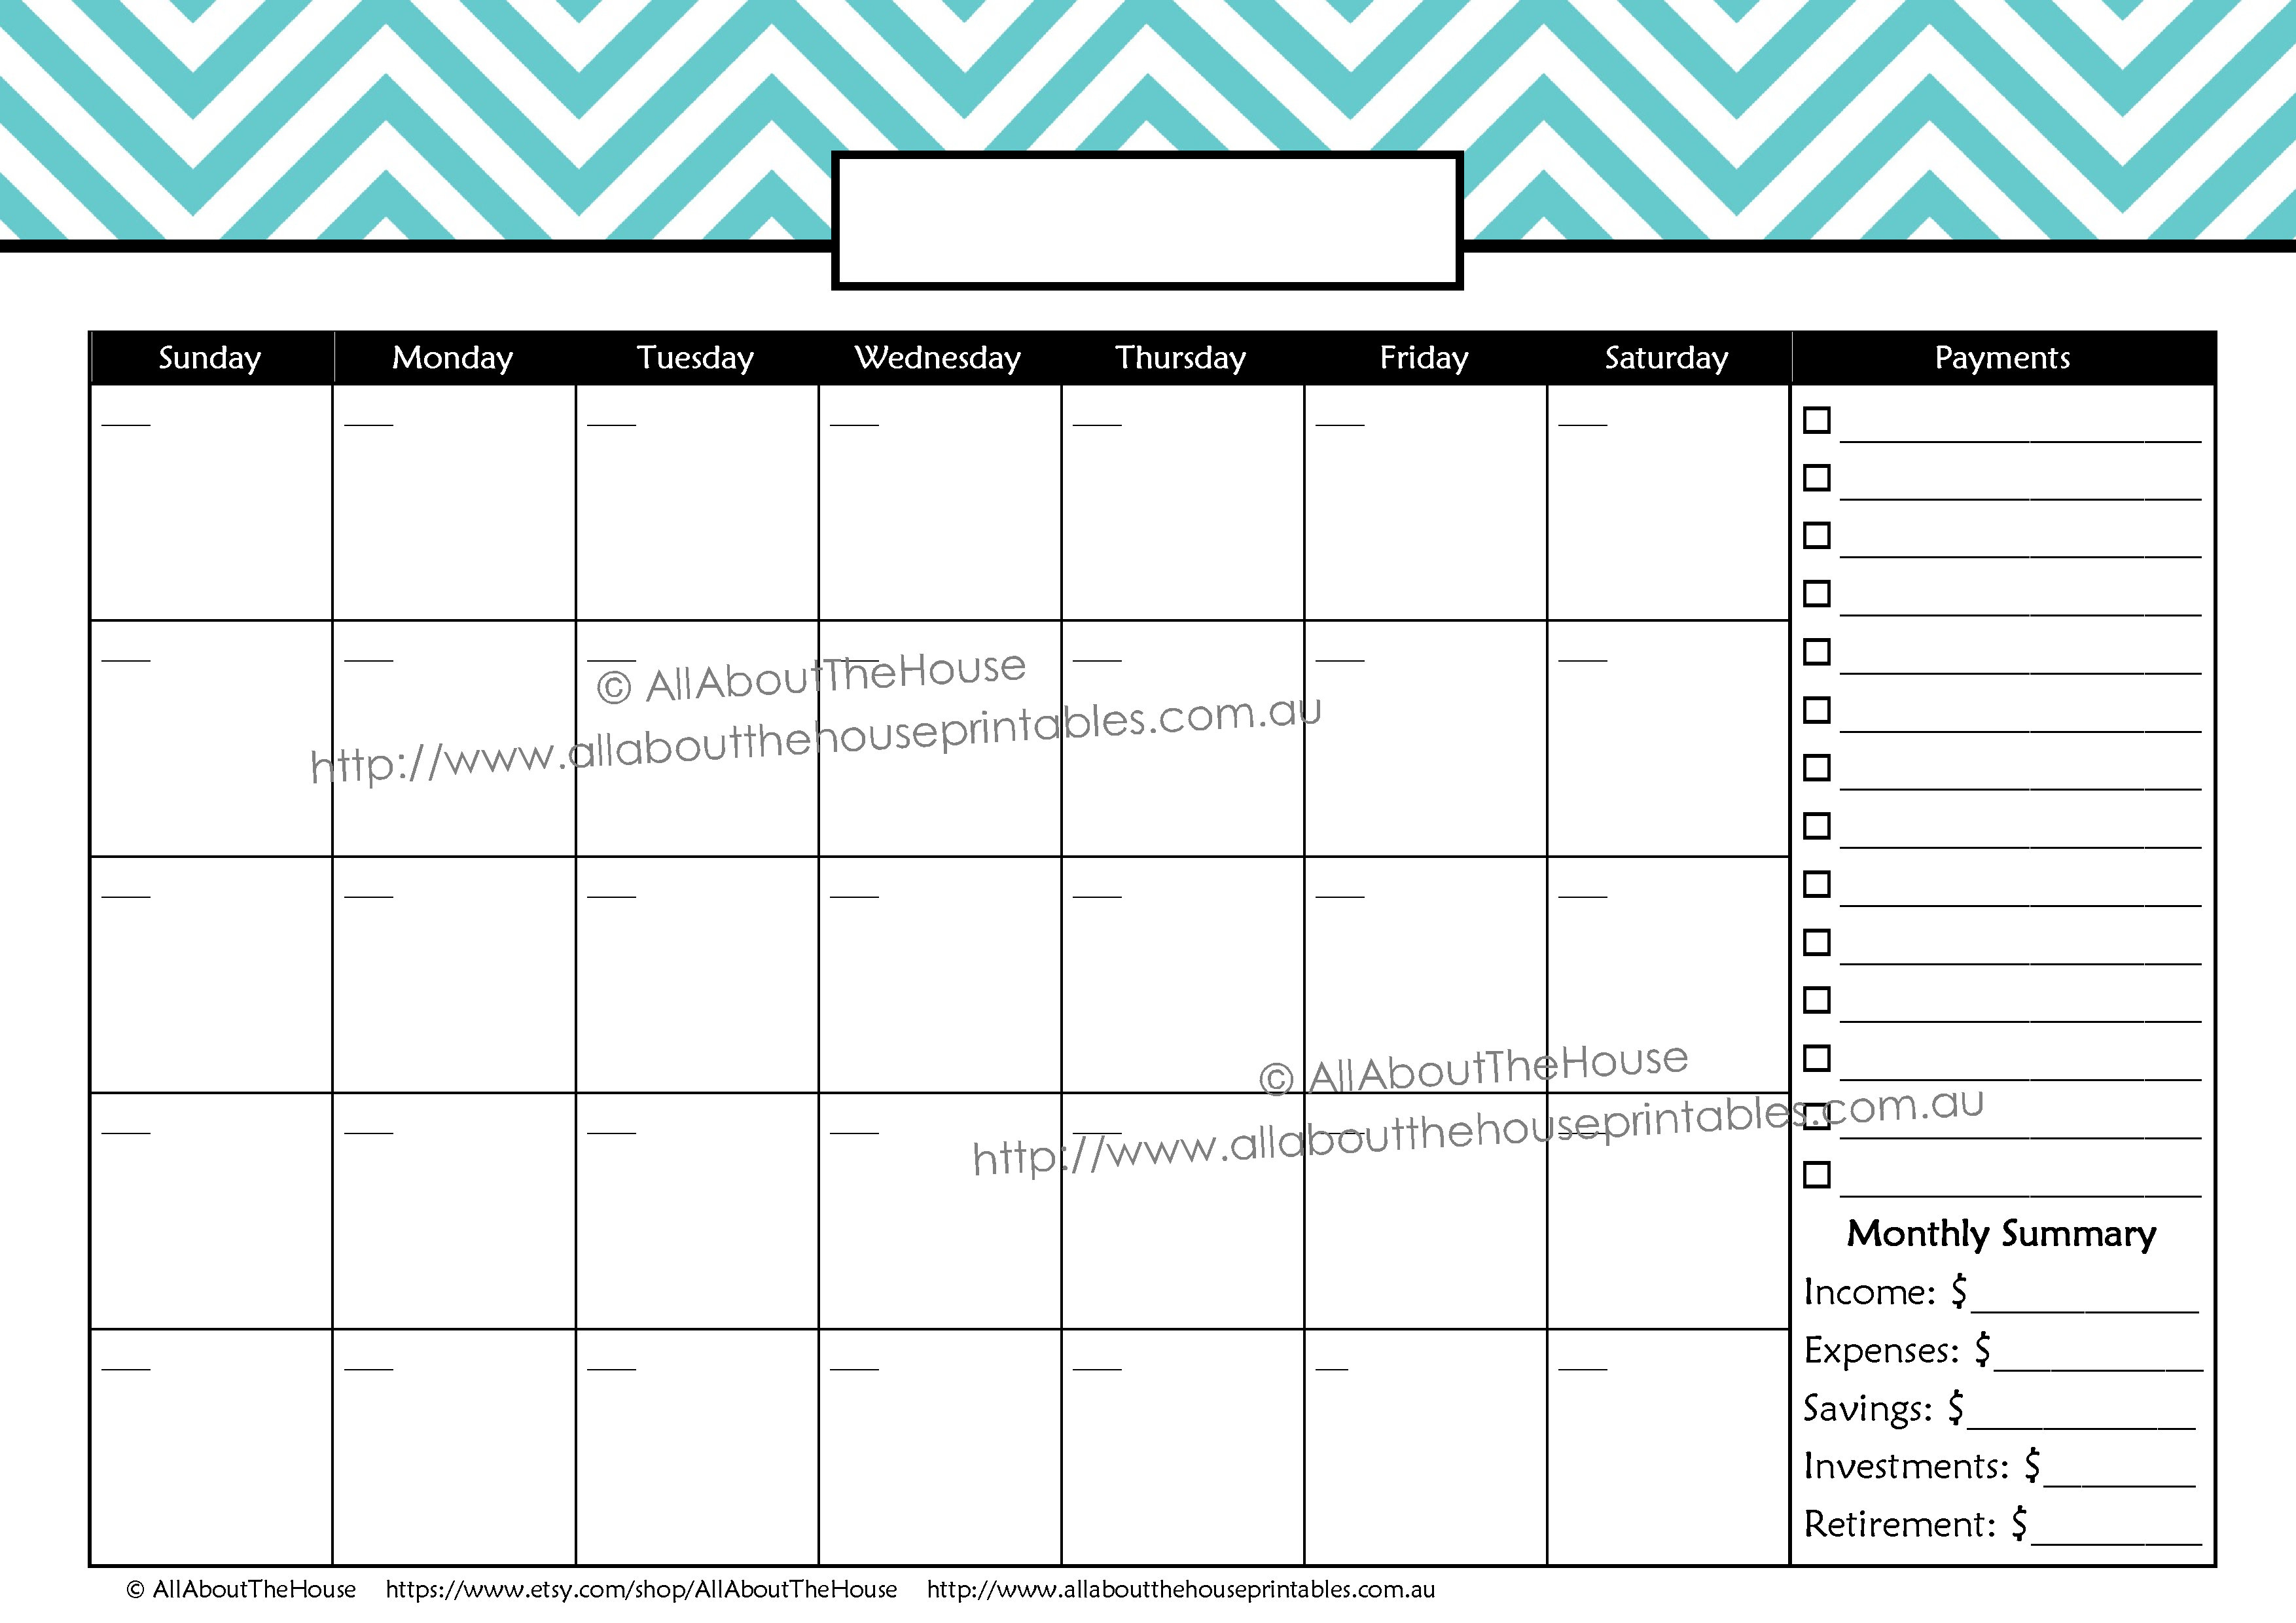 Bpay Planner | Allaboutthehouse Printables